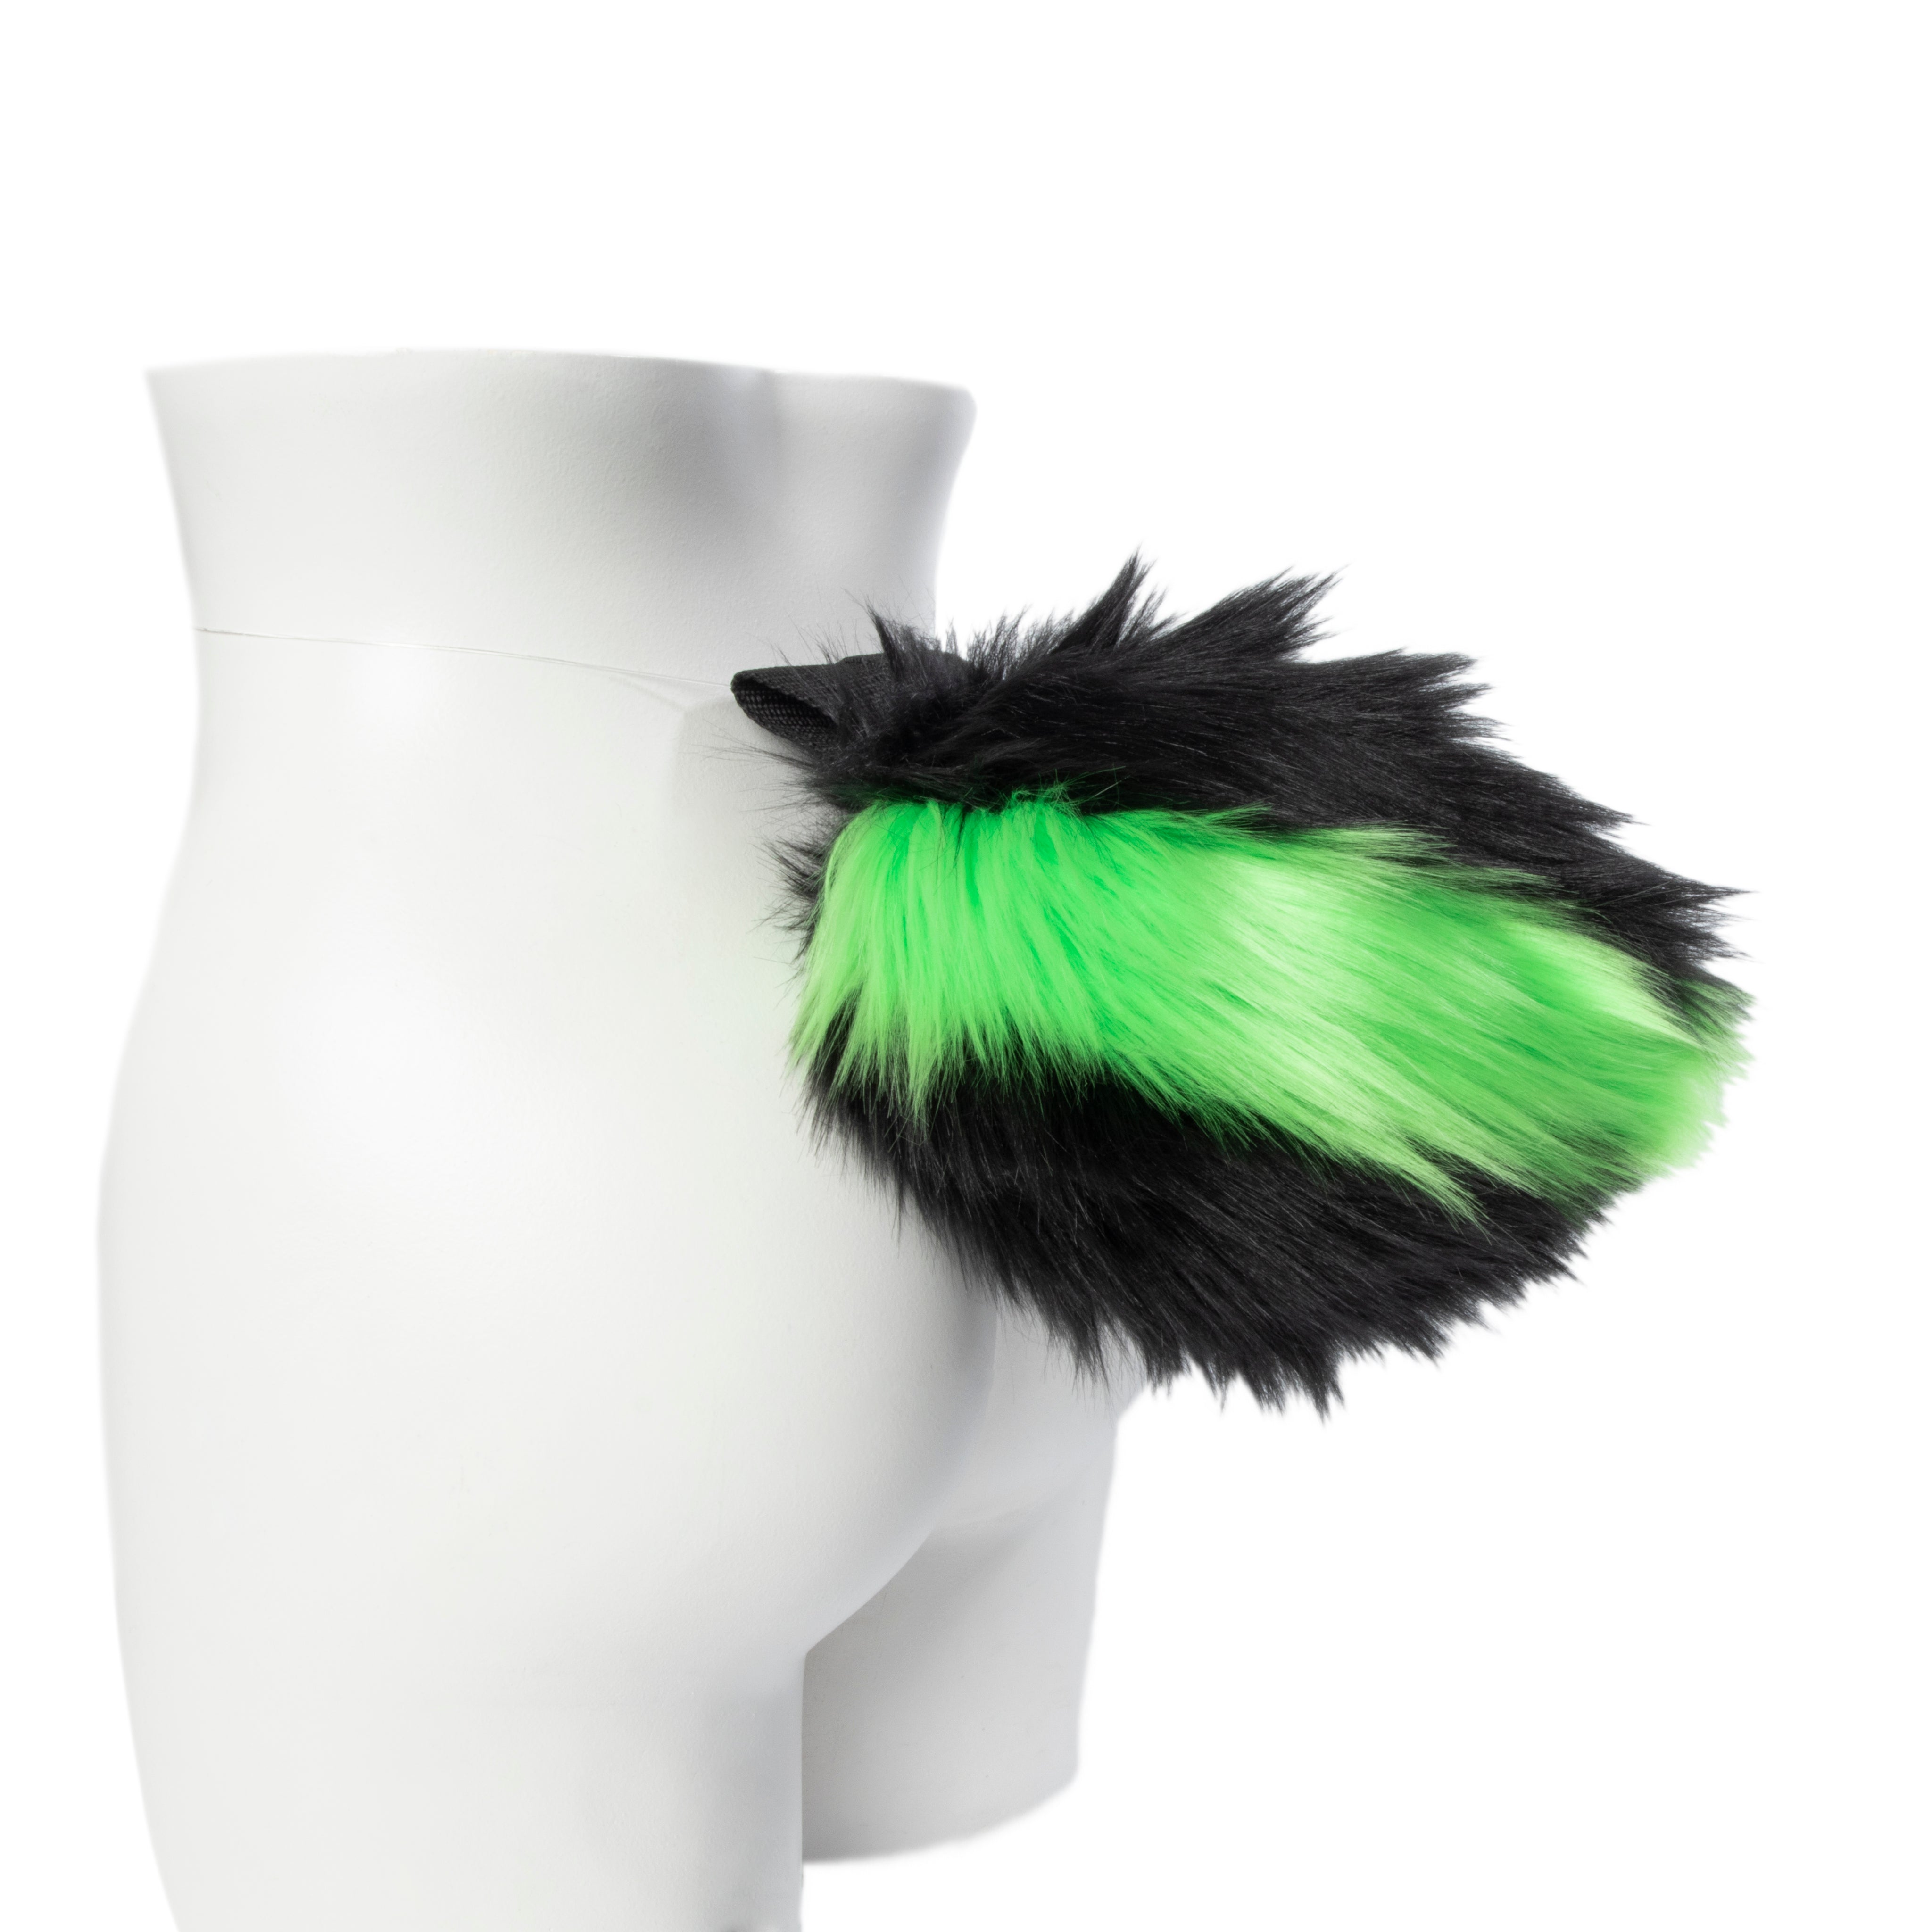 lime green Pawstar Bunny Plus Tail. Faux fur furry rabbit costume tail.